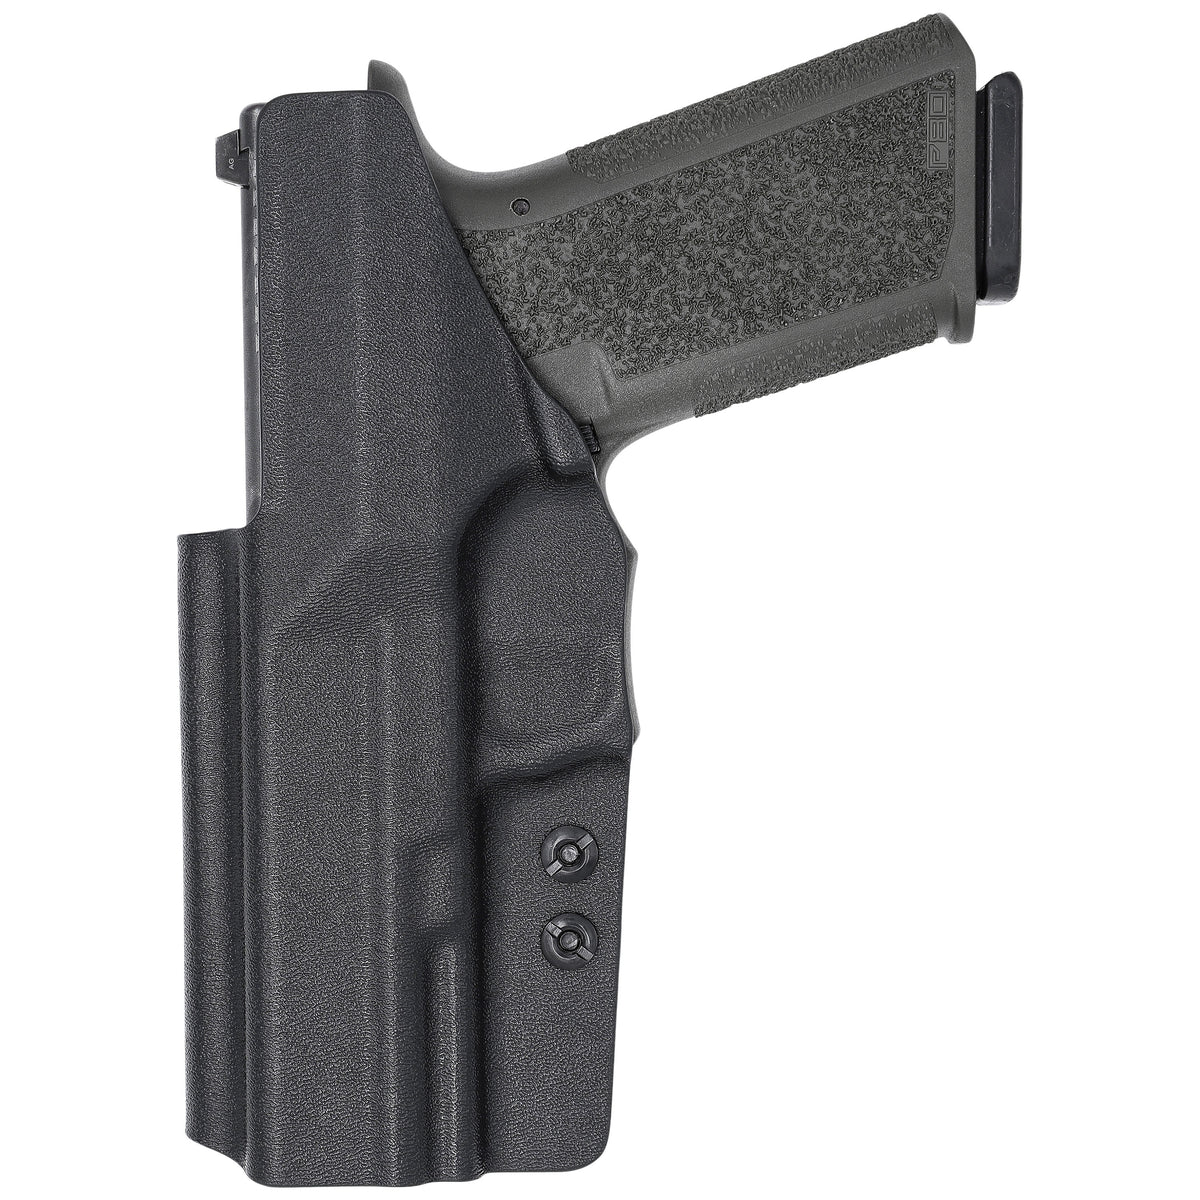 Polymer 80 PF940 V2 IWB Optics Ready - Concealed Carry Holsters